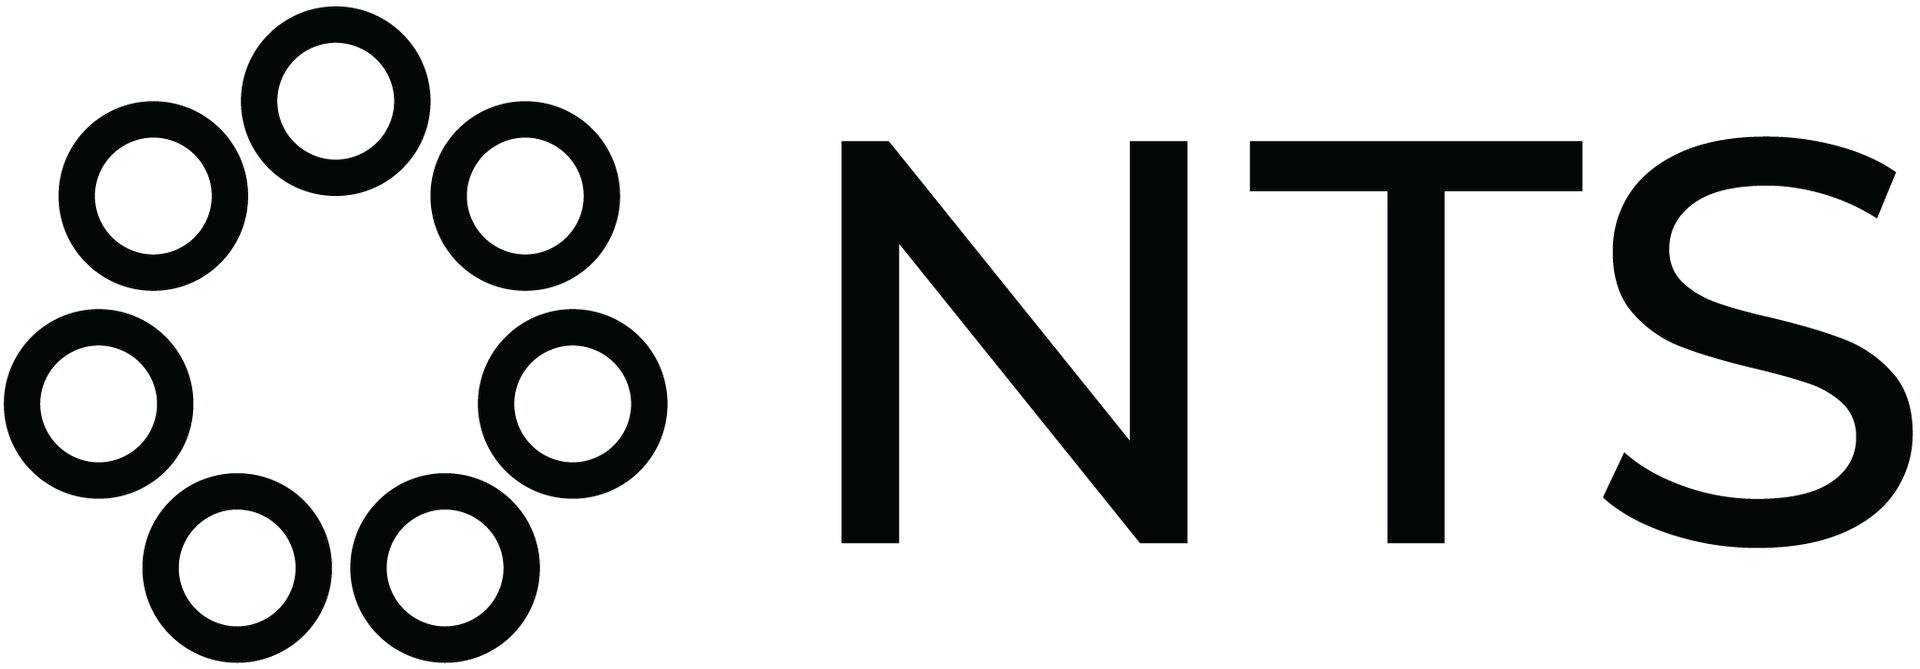 a black and white logo for nts with circles around the word nts .